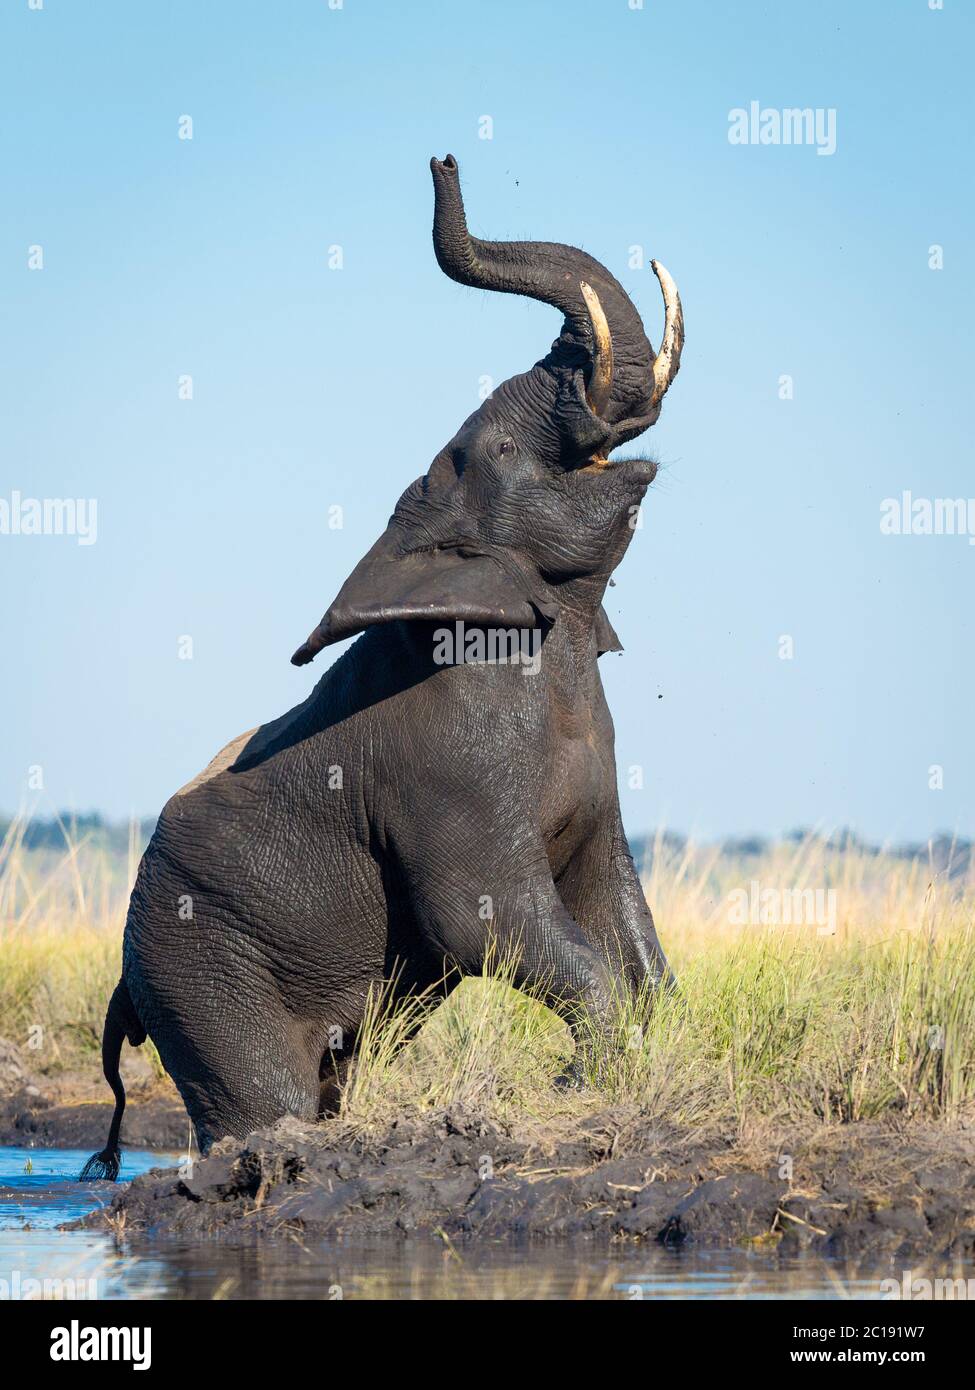 Vertical image of an elephant standing at the edge of Chobe River with his trunk pointing to the sky with blue sky in the background Stock Photo